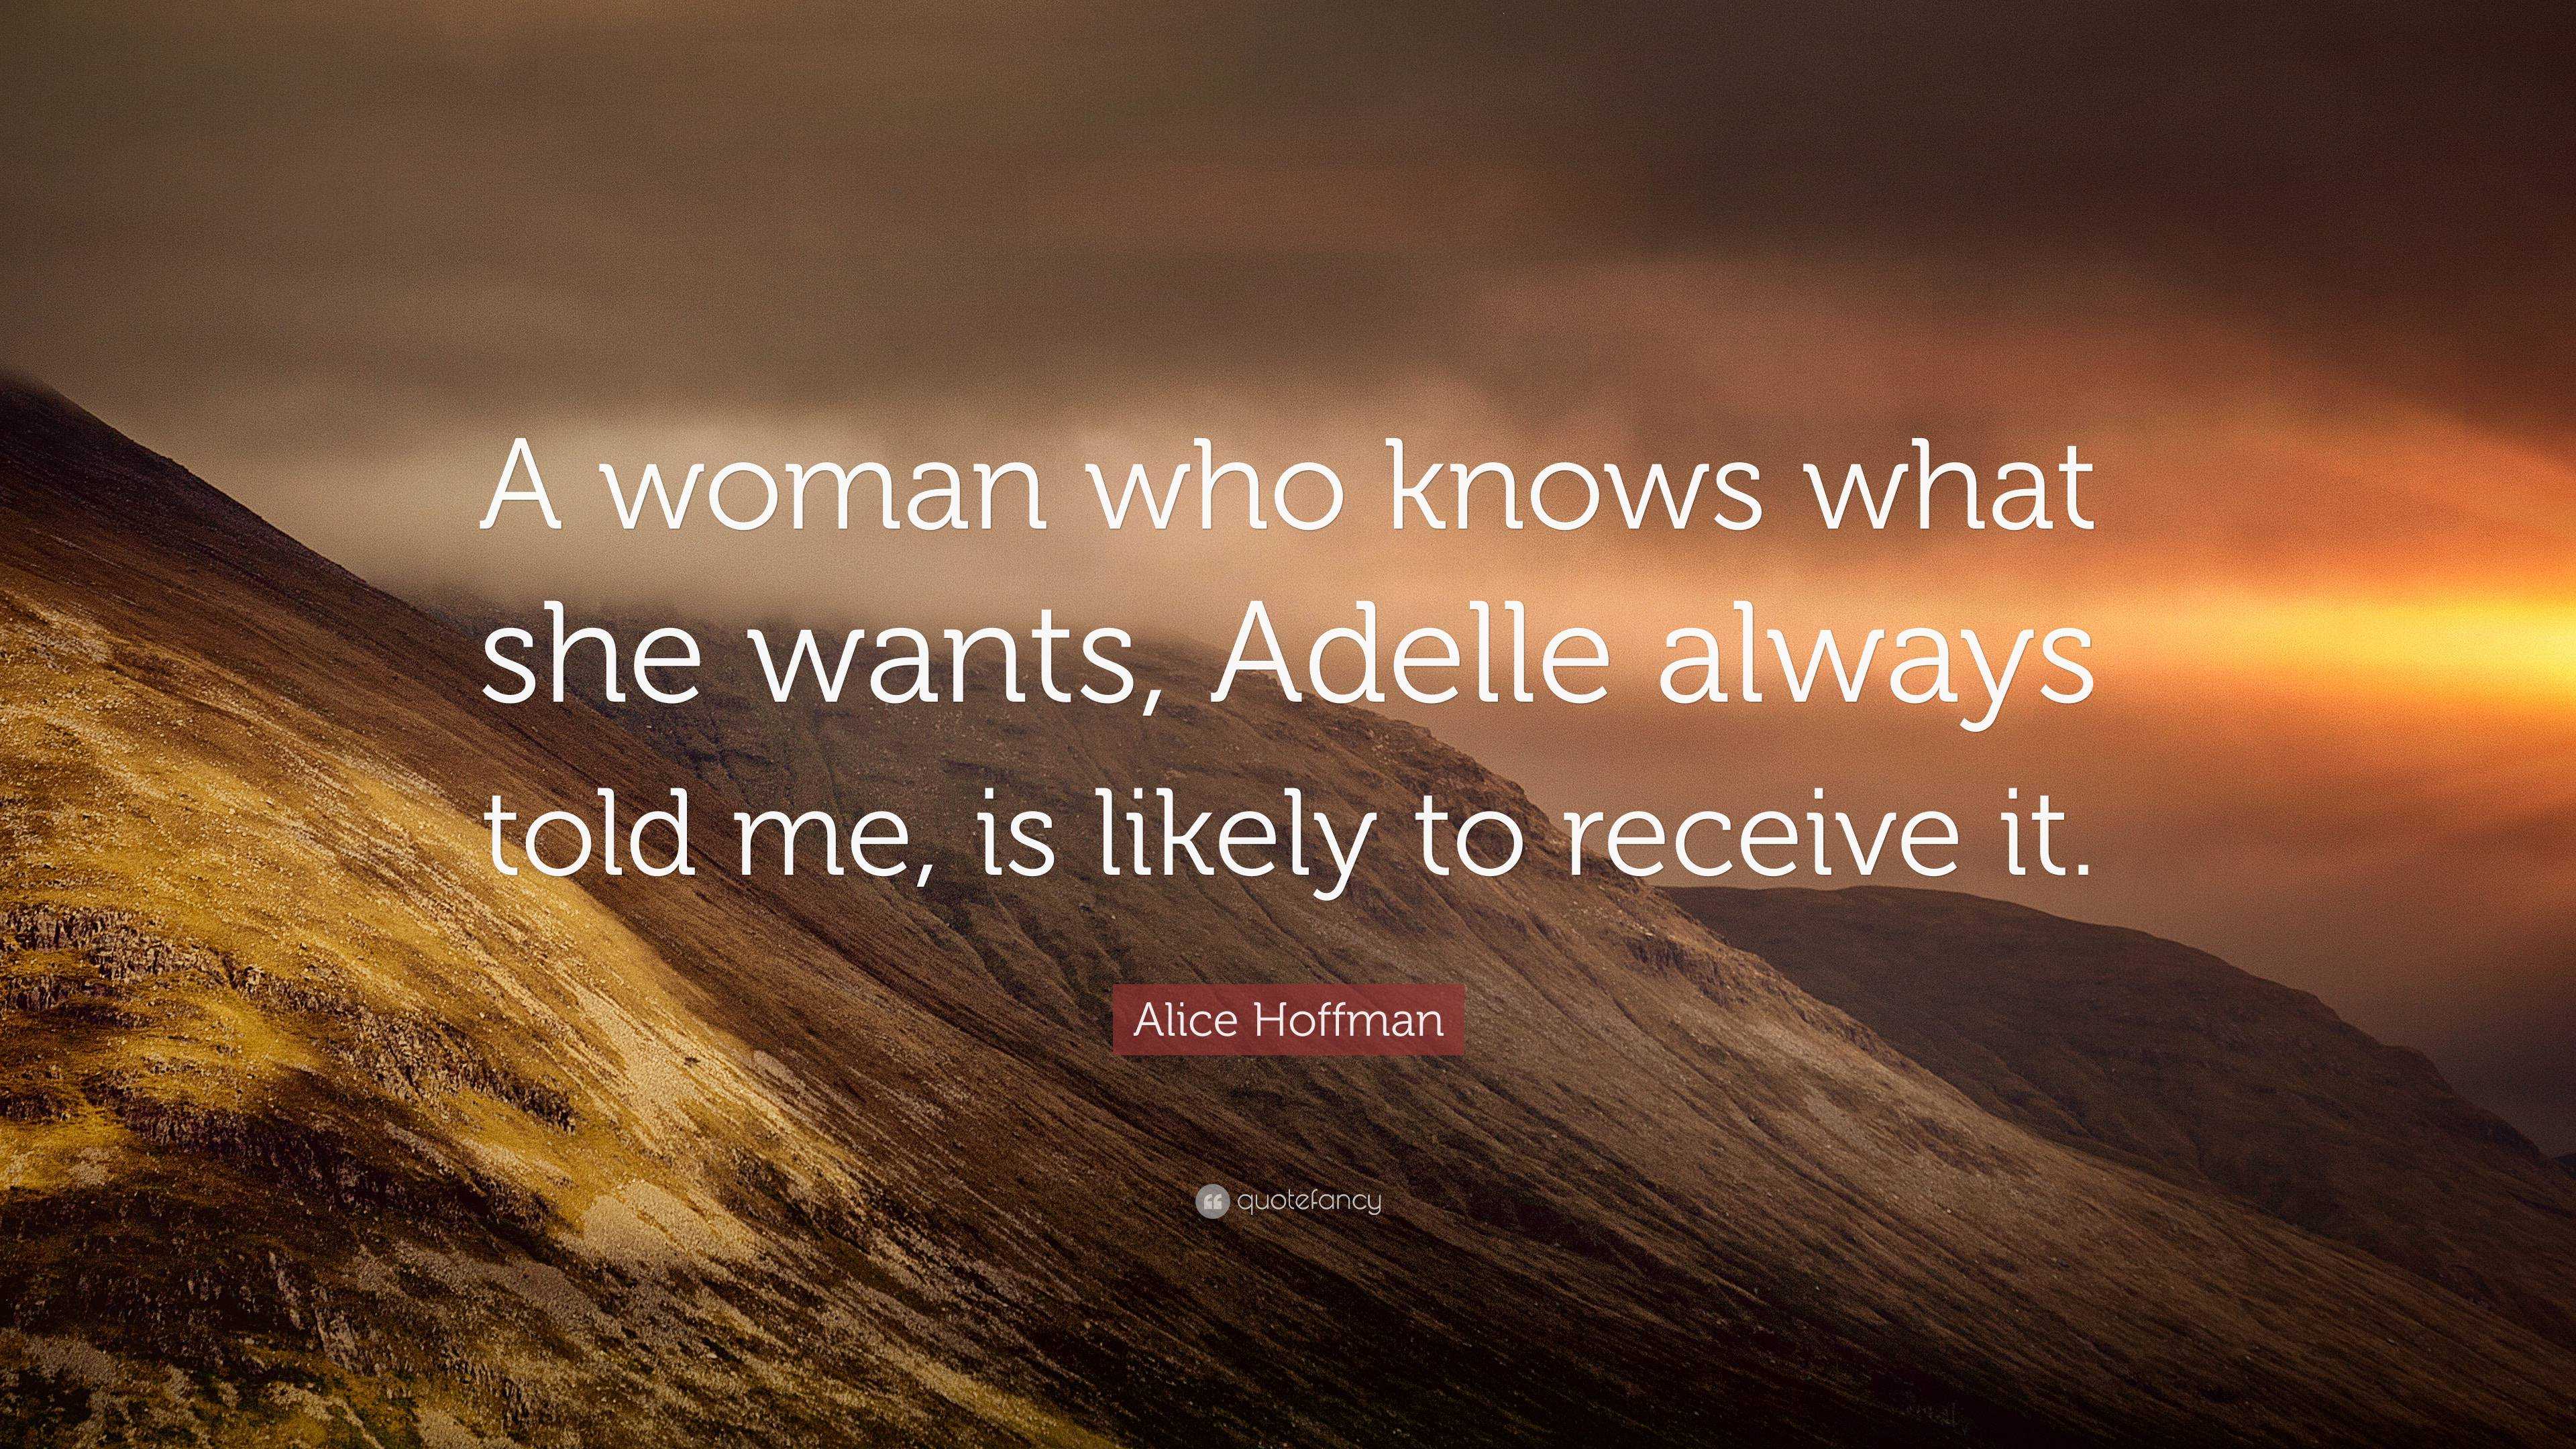 Alice Hoffman Quote “a Woman Who Knows What She Wants Adelle Always Told Me Is Likely To